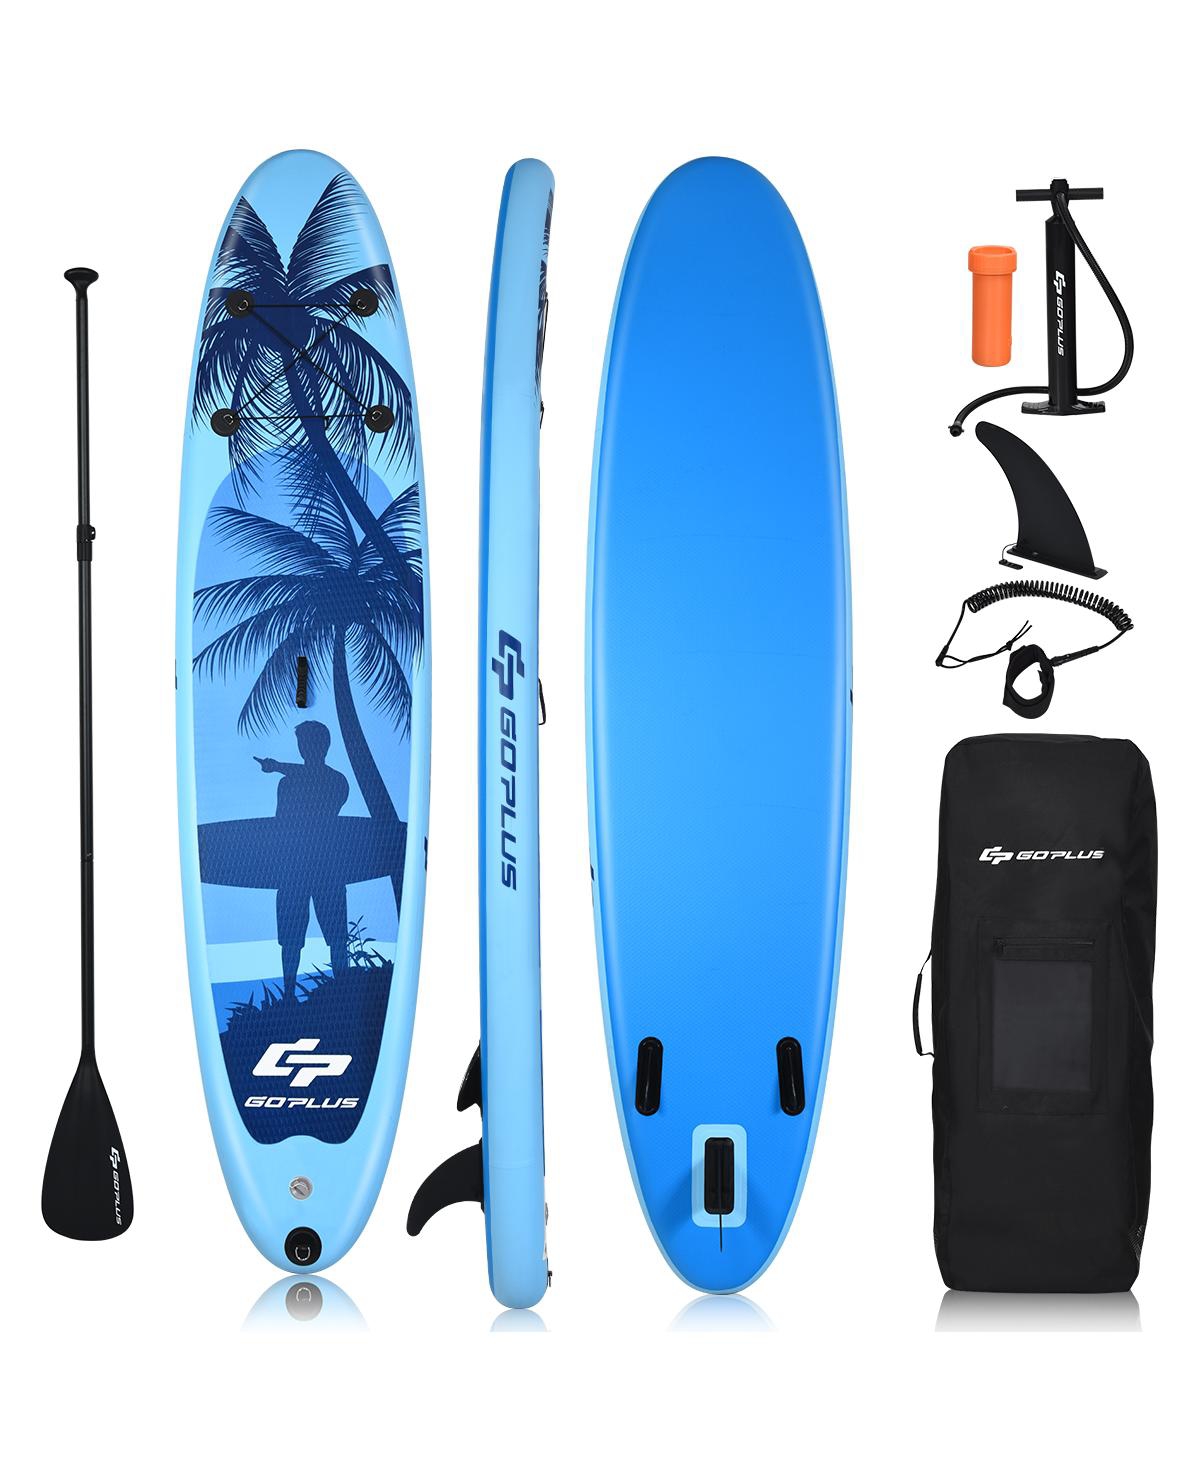 9.8' Inflatable Stand Up Paddle Board Surfboard - Navy